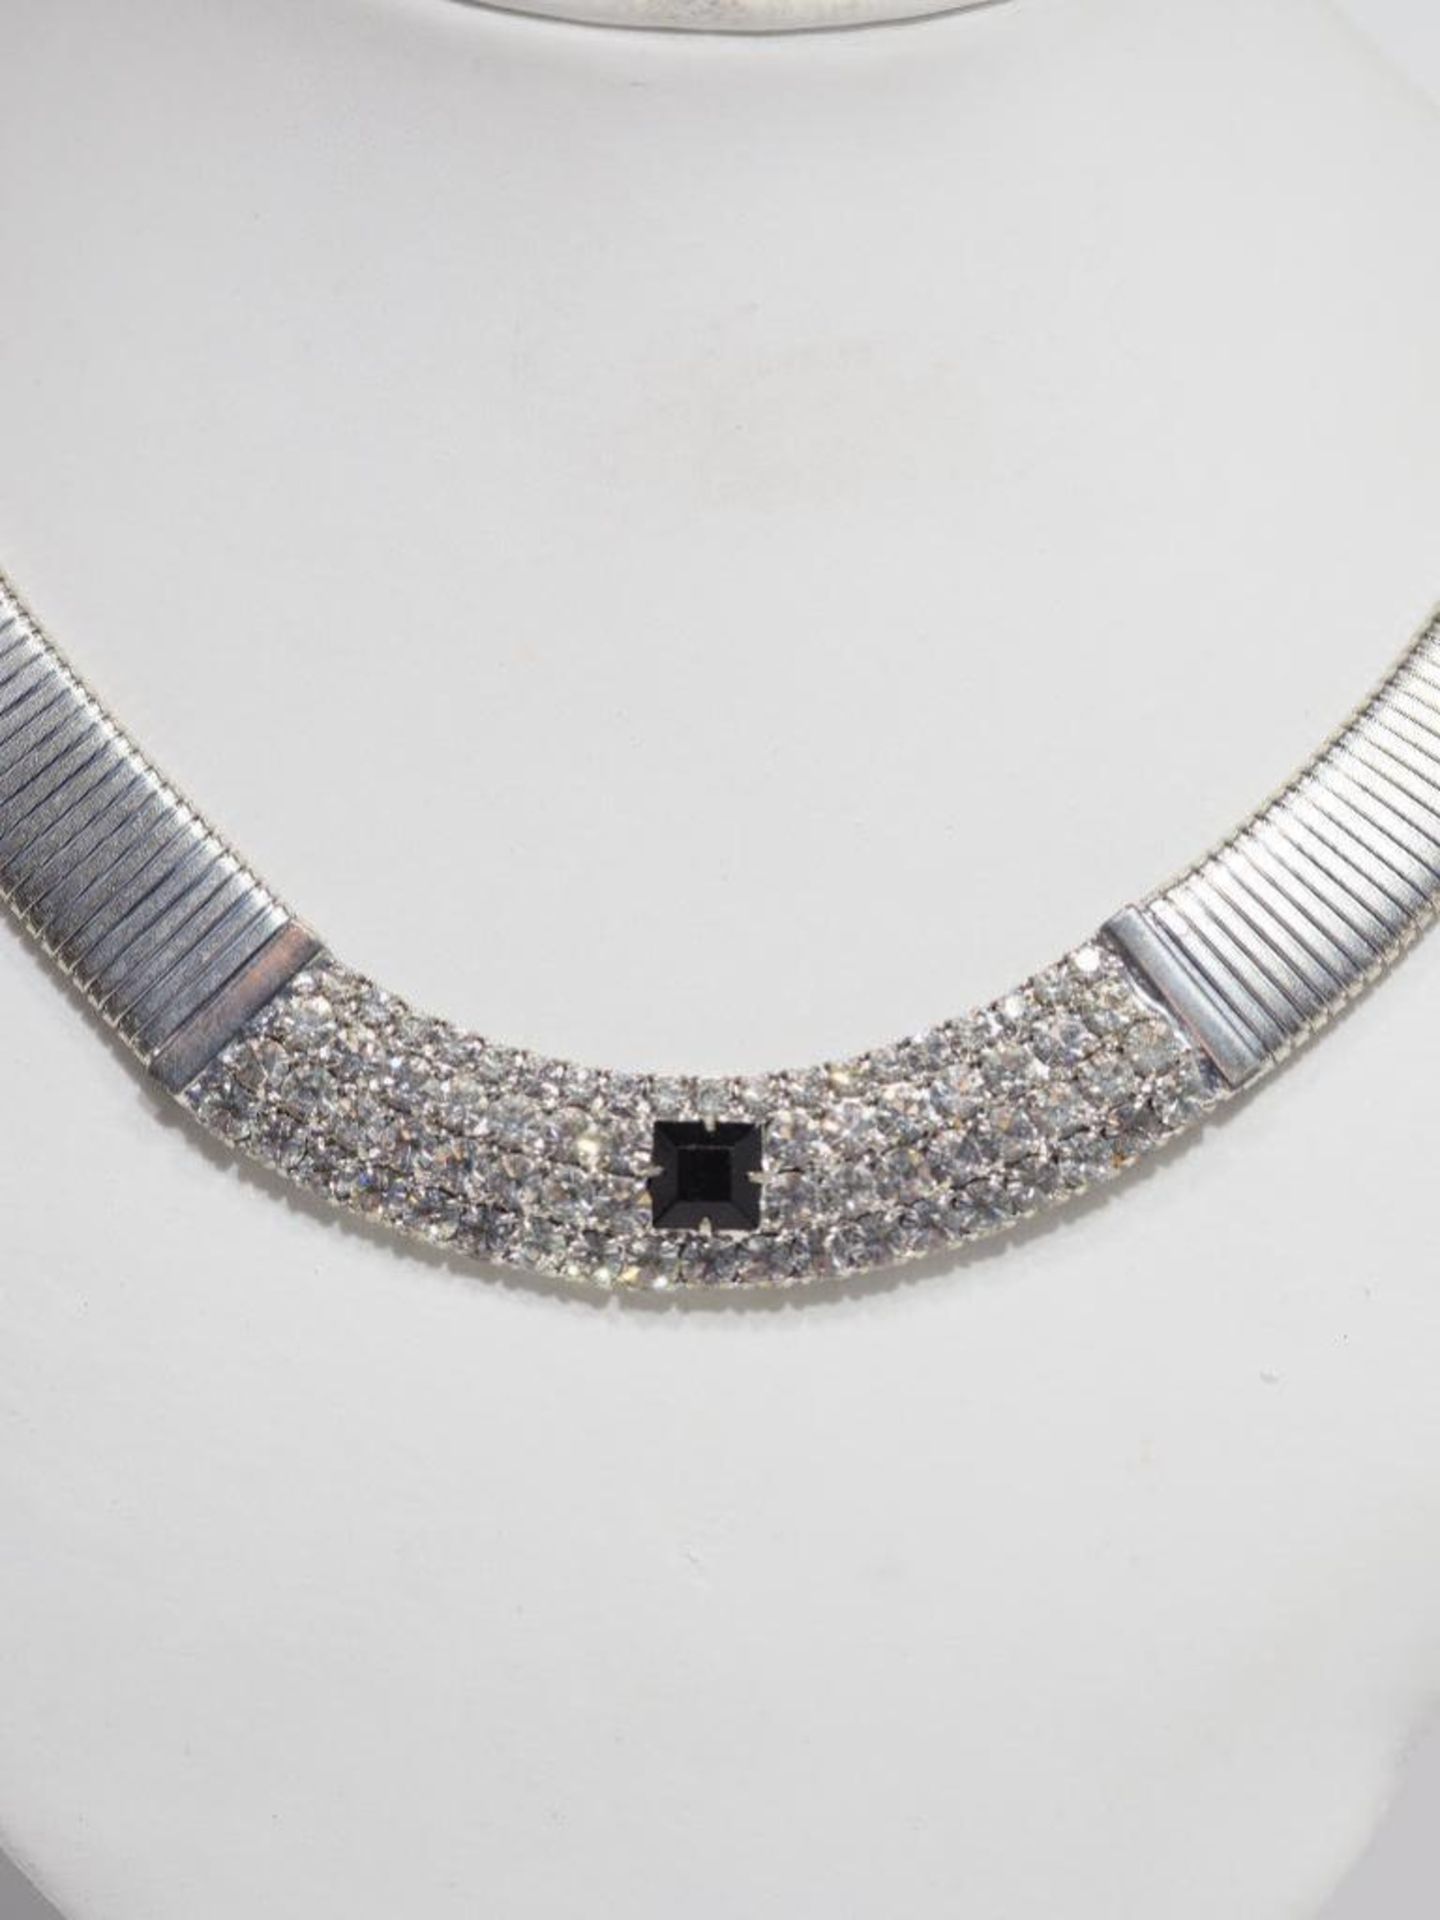 High Fashion Austrian Crystal Necklace. Retail $200 - Image 2 of 2